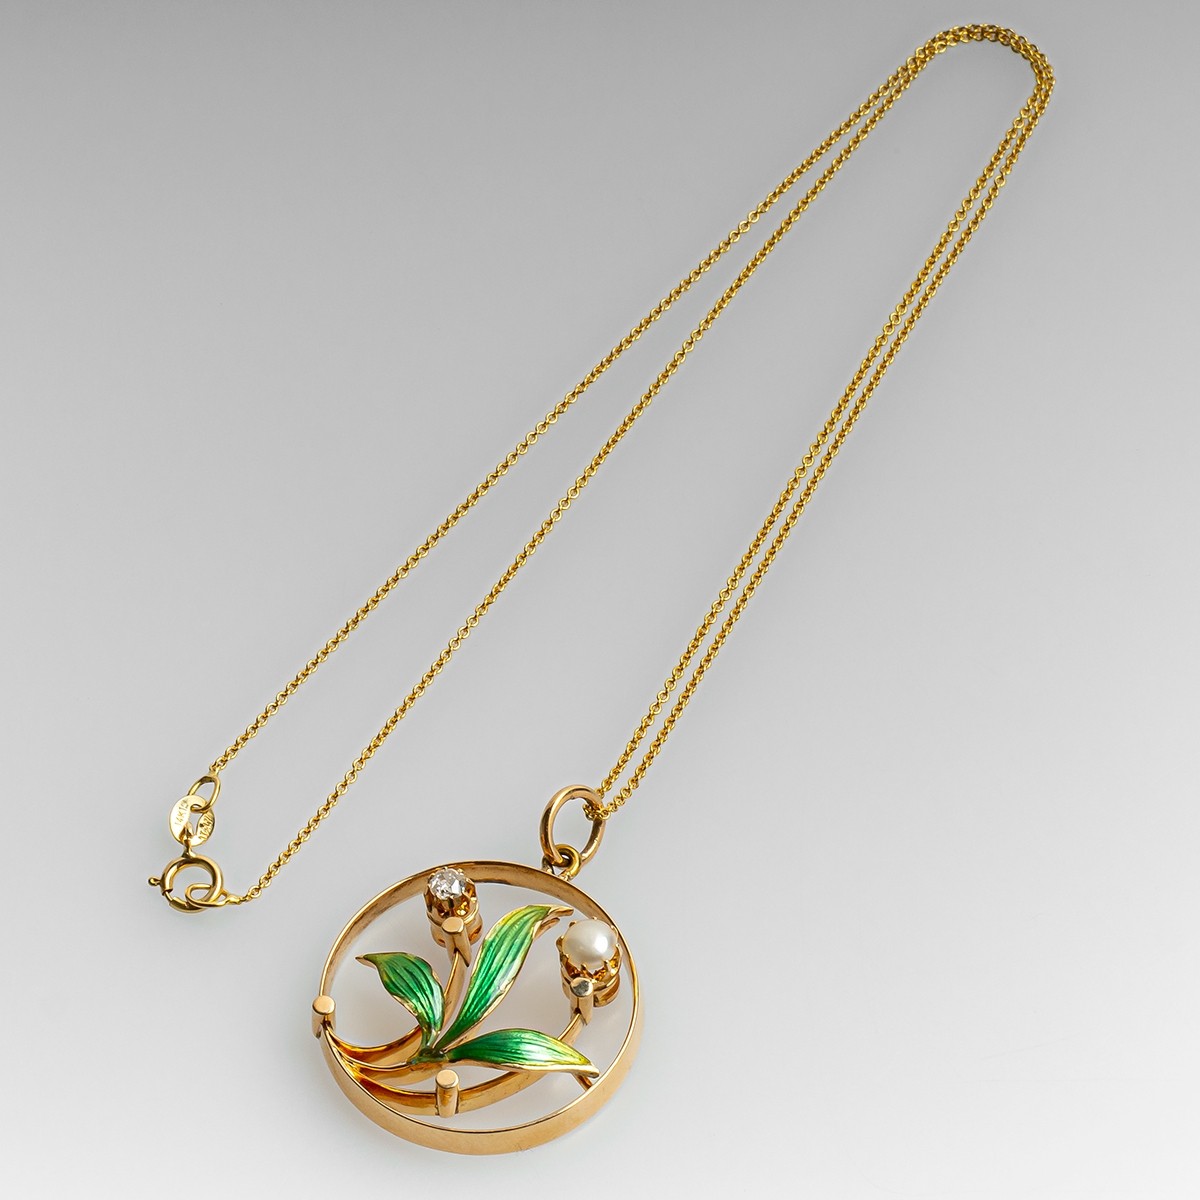 Antique Art Nouveau Double Daisy Flower Necklace in 15k Gold on 14k Yellow Gold 16 Chain JL507